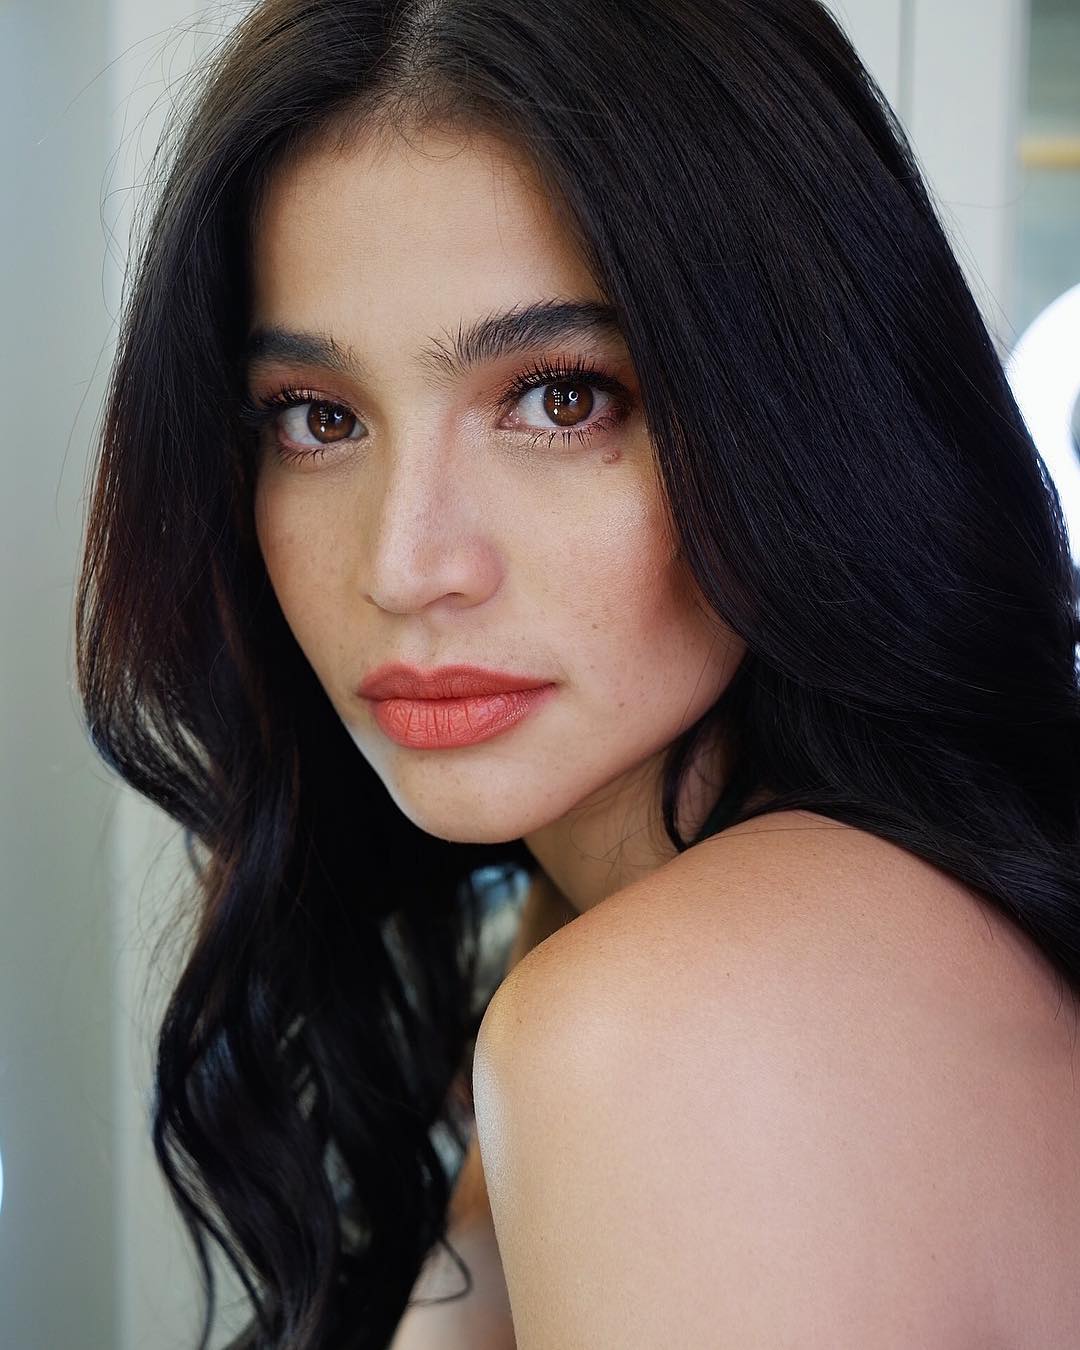 Anne Curtis is most followed Filipino, 1st to reach 14M Twitter